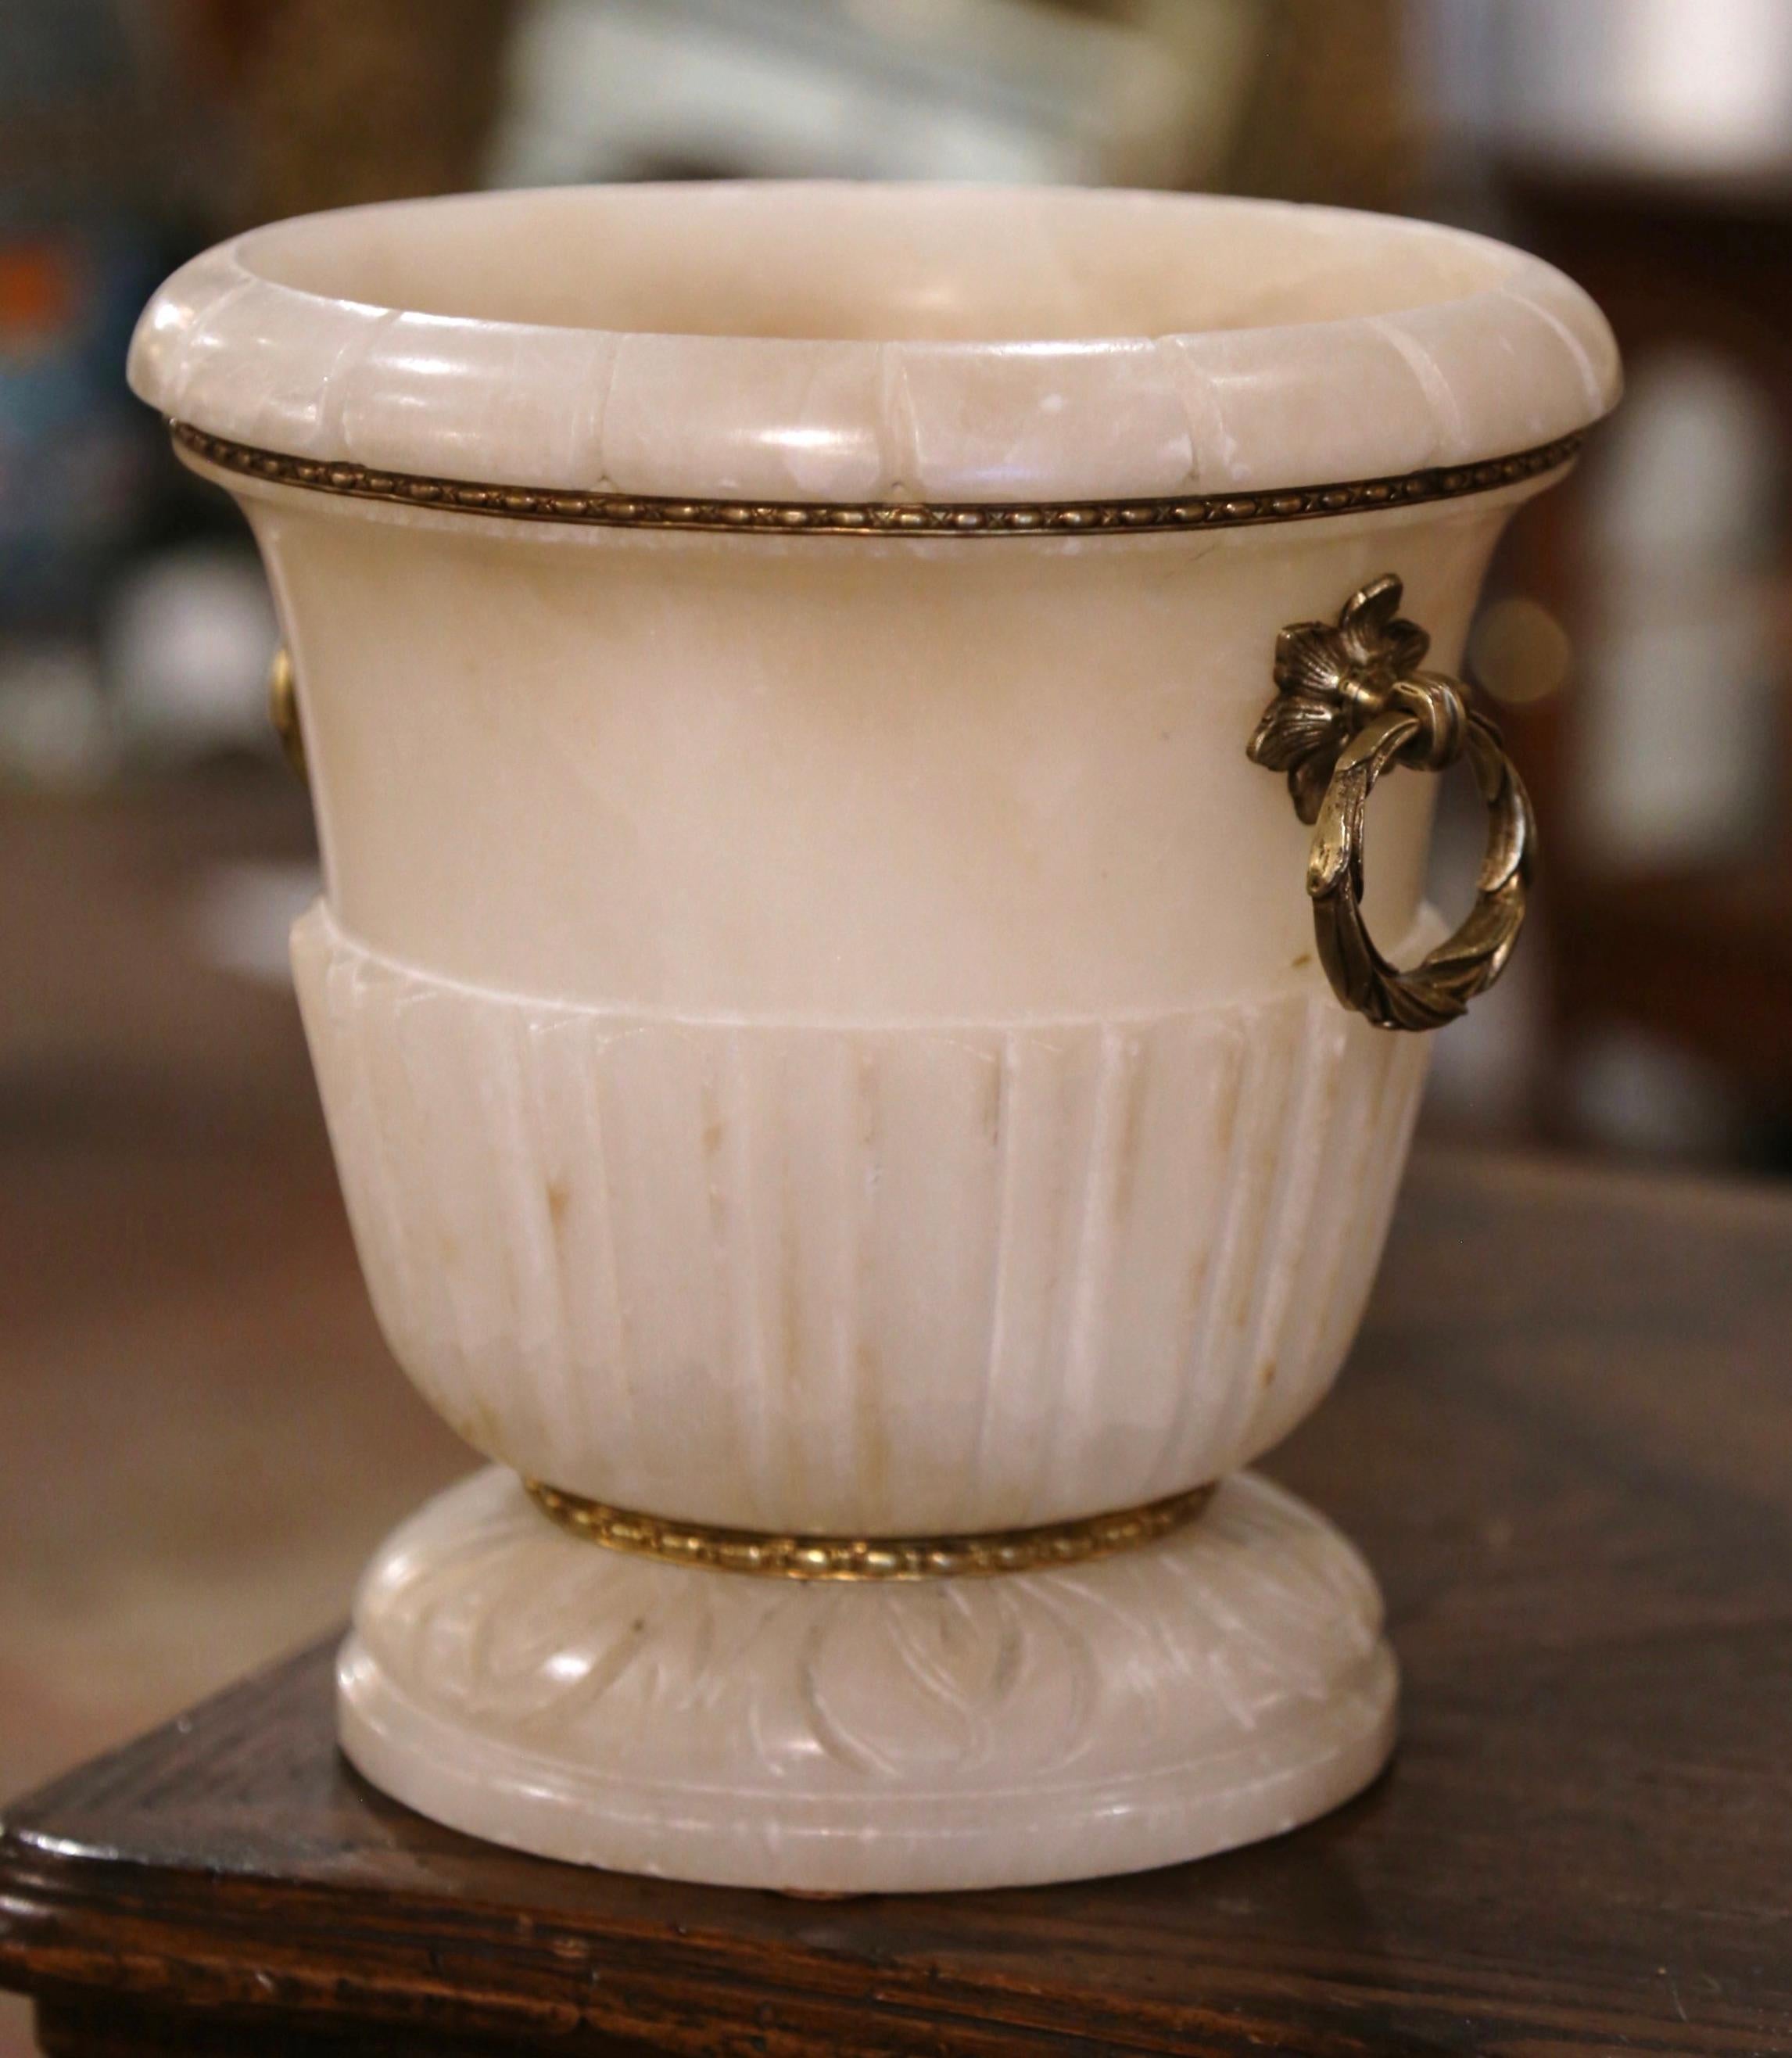 Serve champagne or white wine in style in this antique 